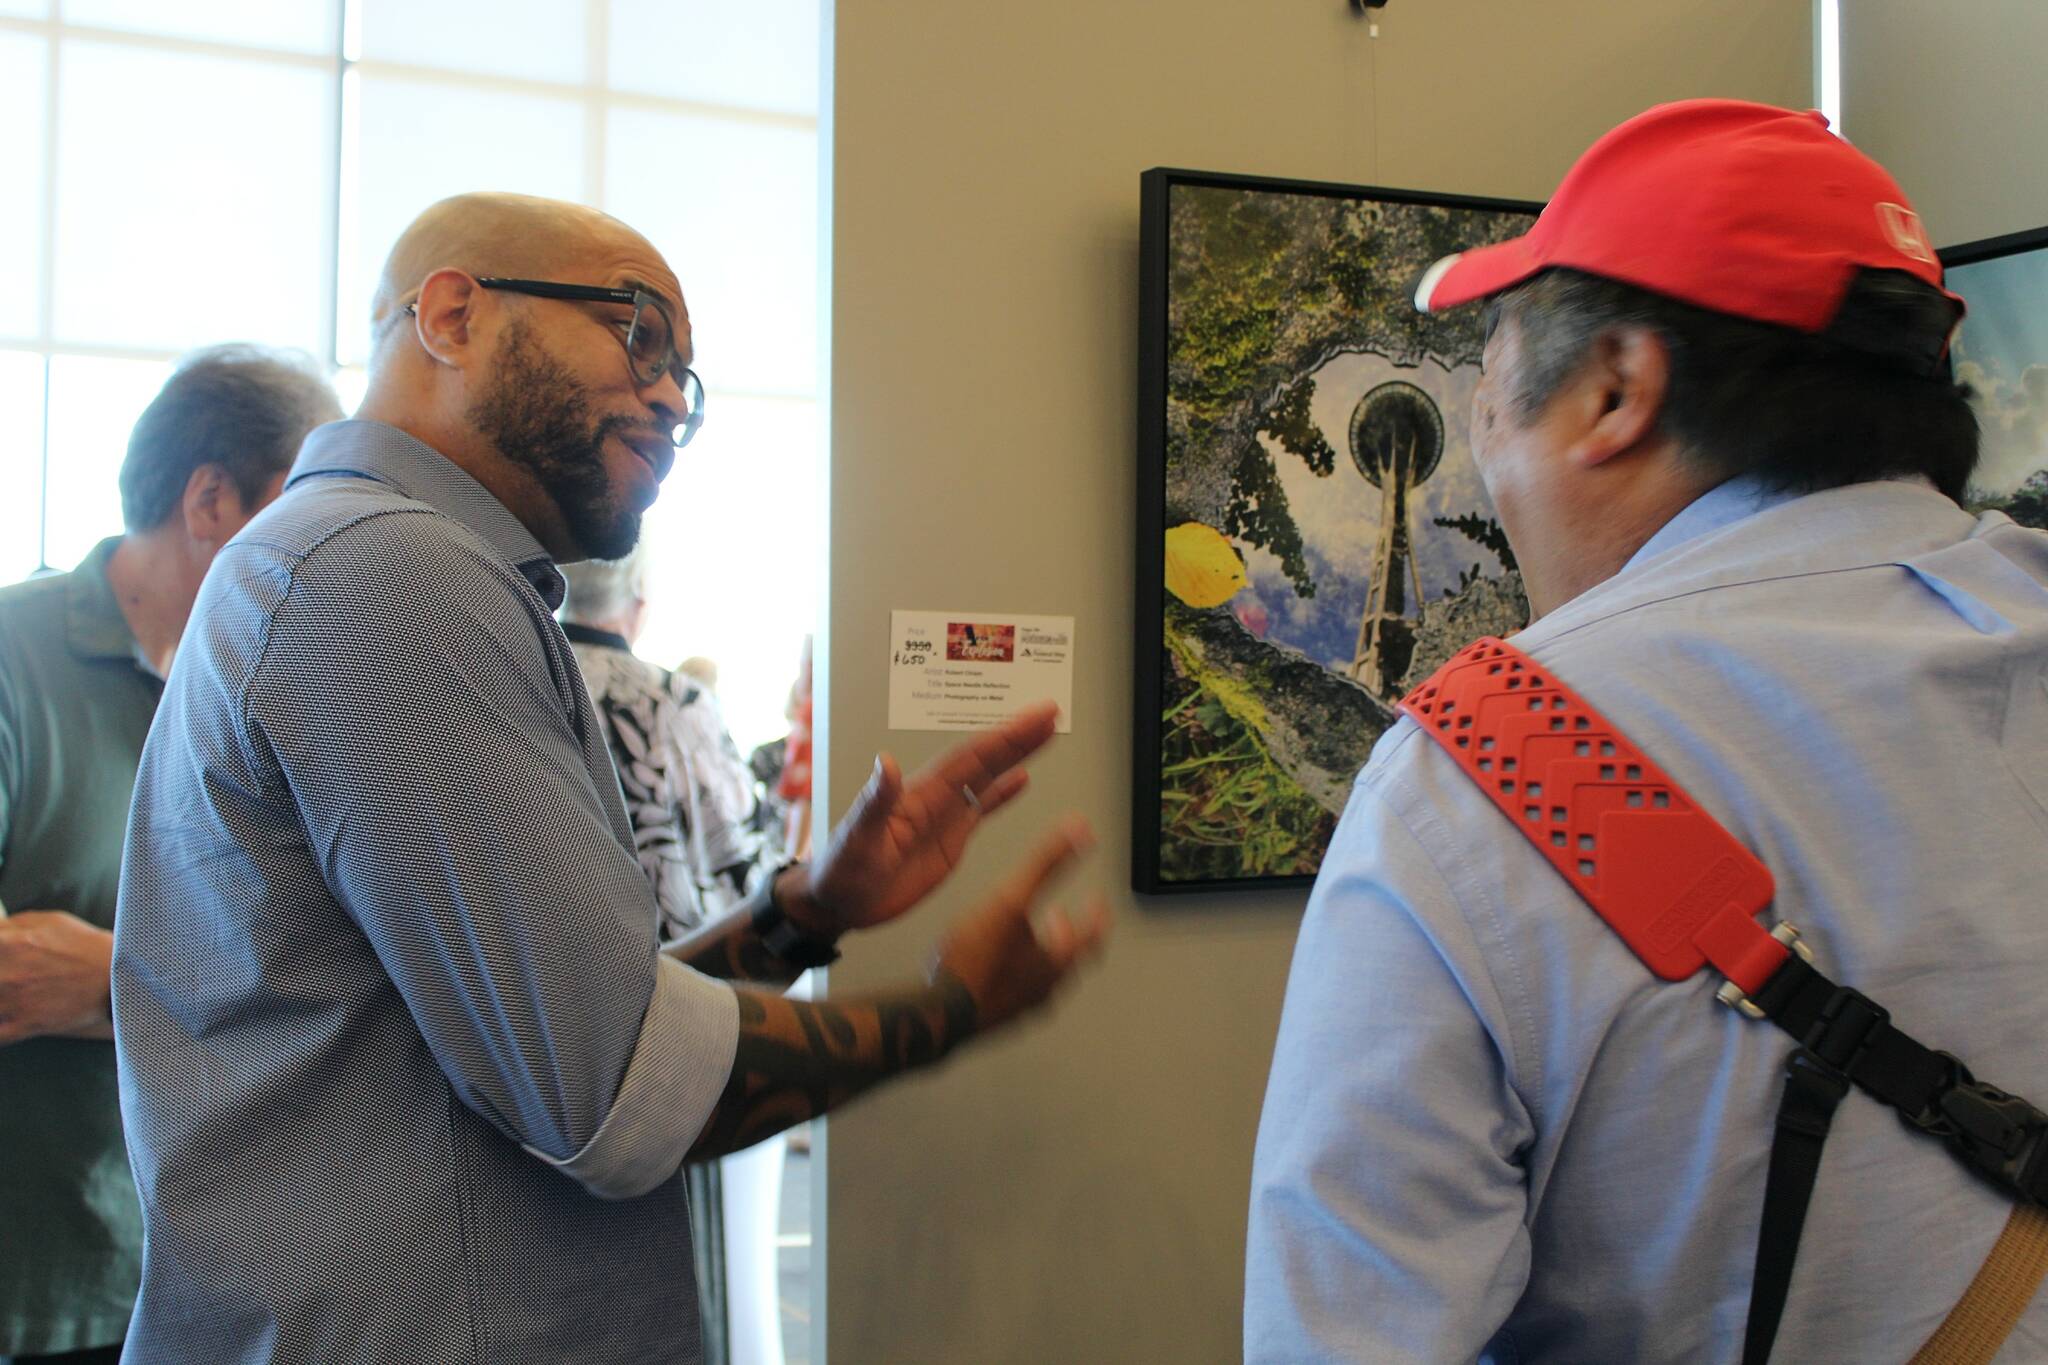 Photographer Robert Chism explains his work “Space Needle Reflection” to fellow photographer Bruce Honda at the Arts Explosion event. Alex Bruell / The Mirror